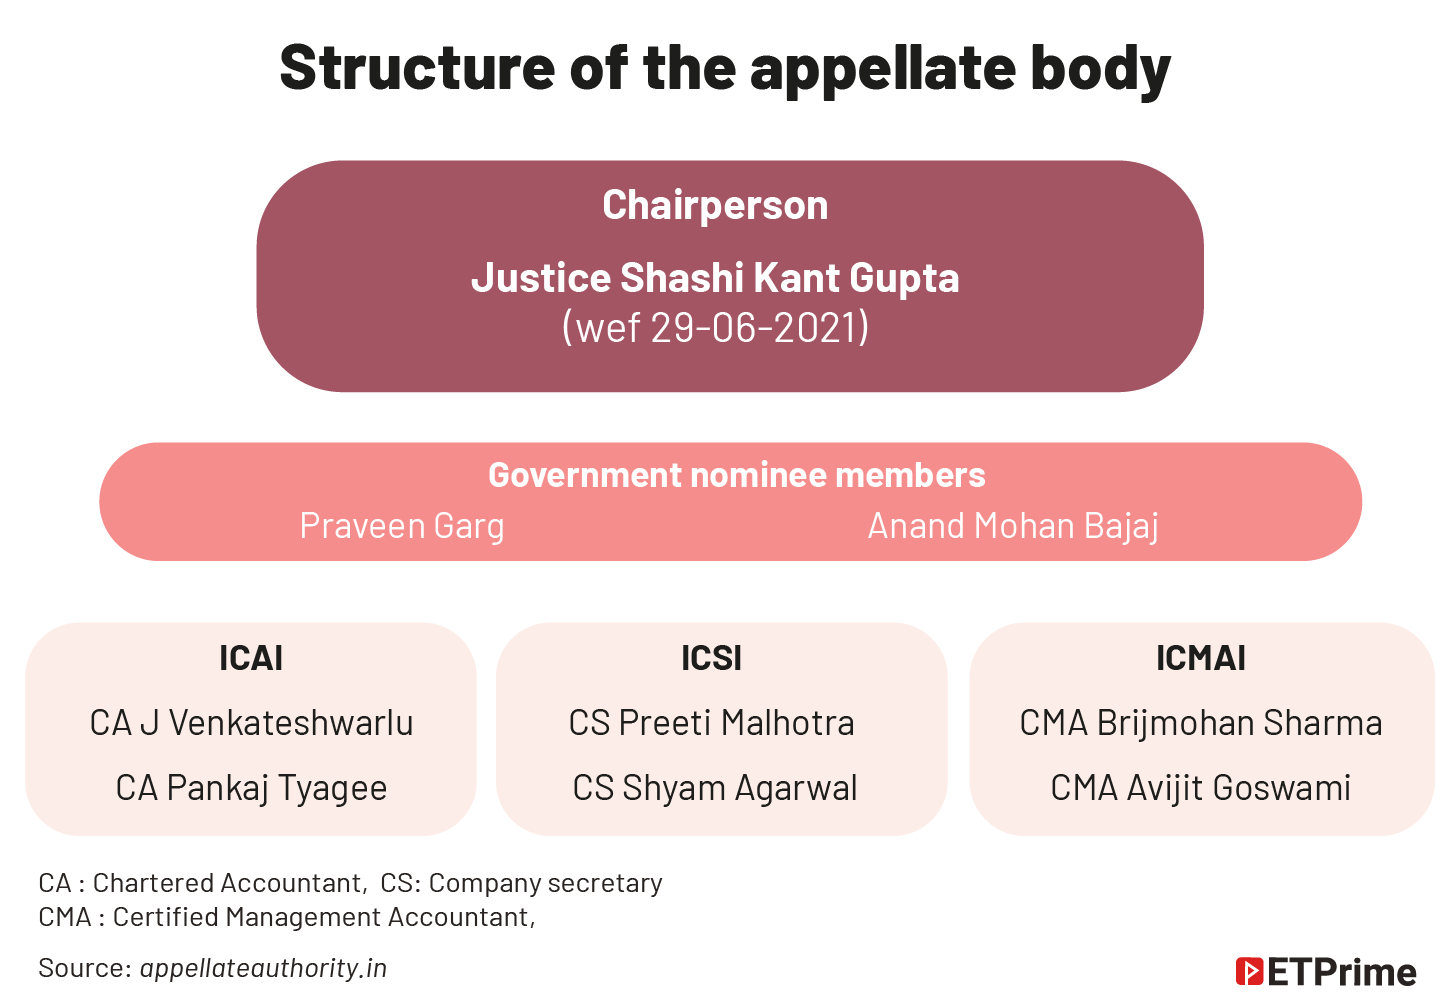 Structure of the appellate body@2x